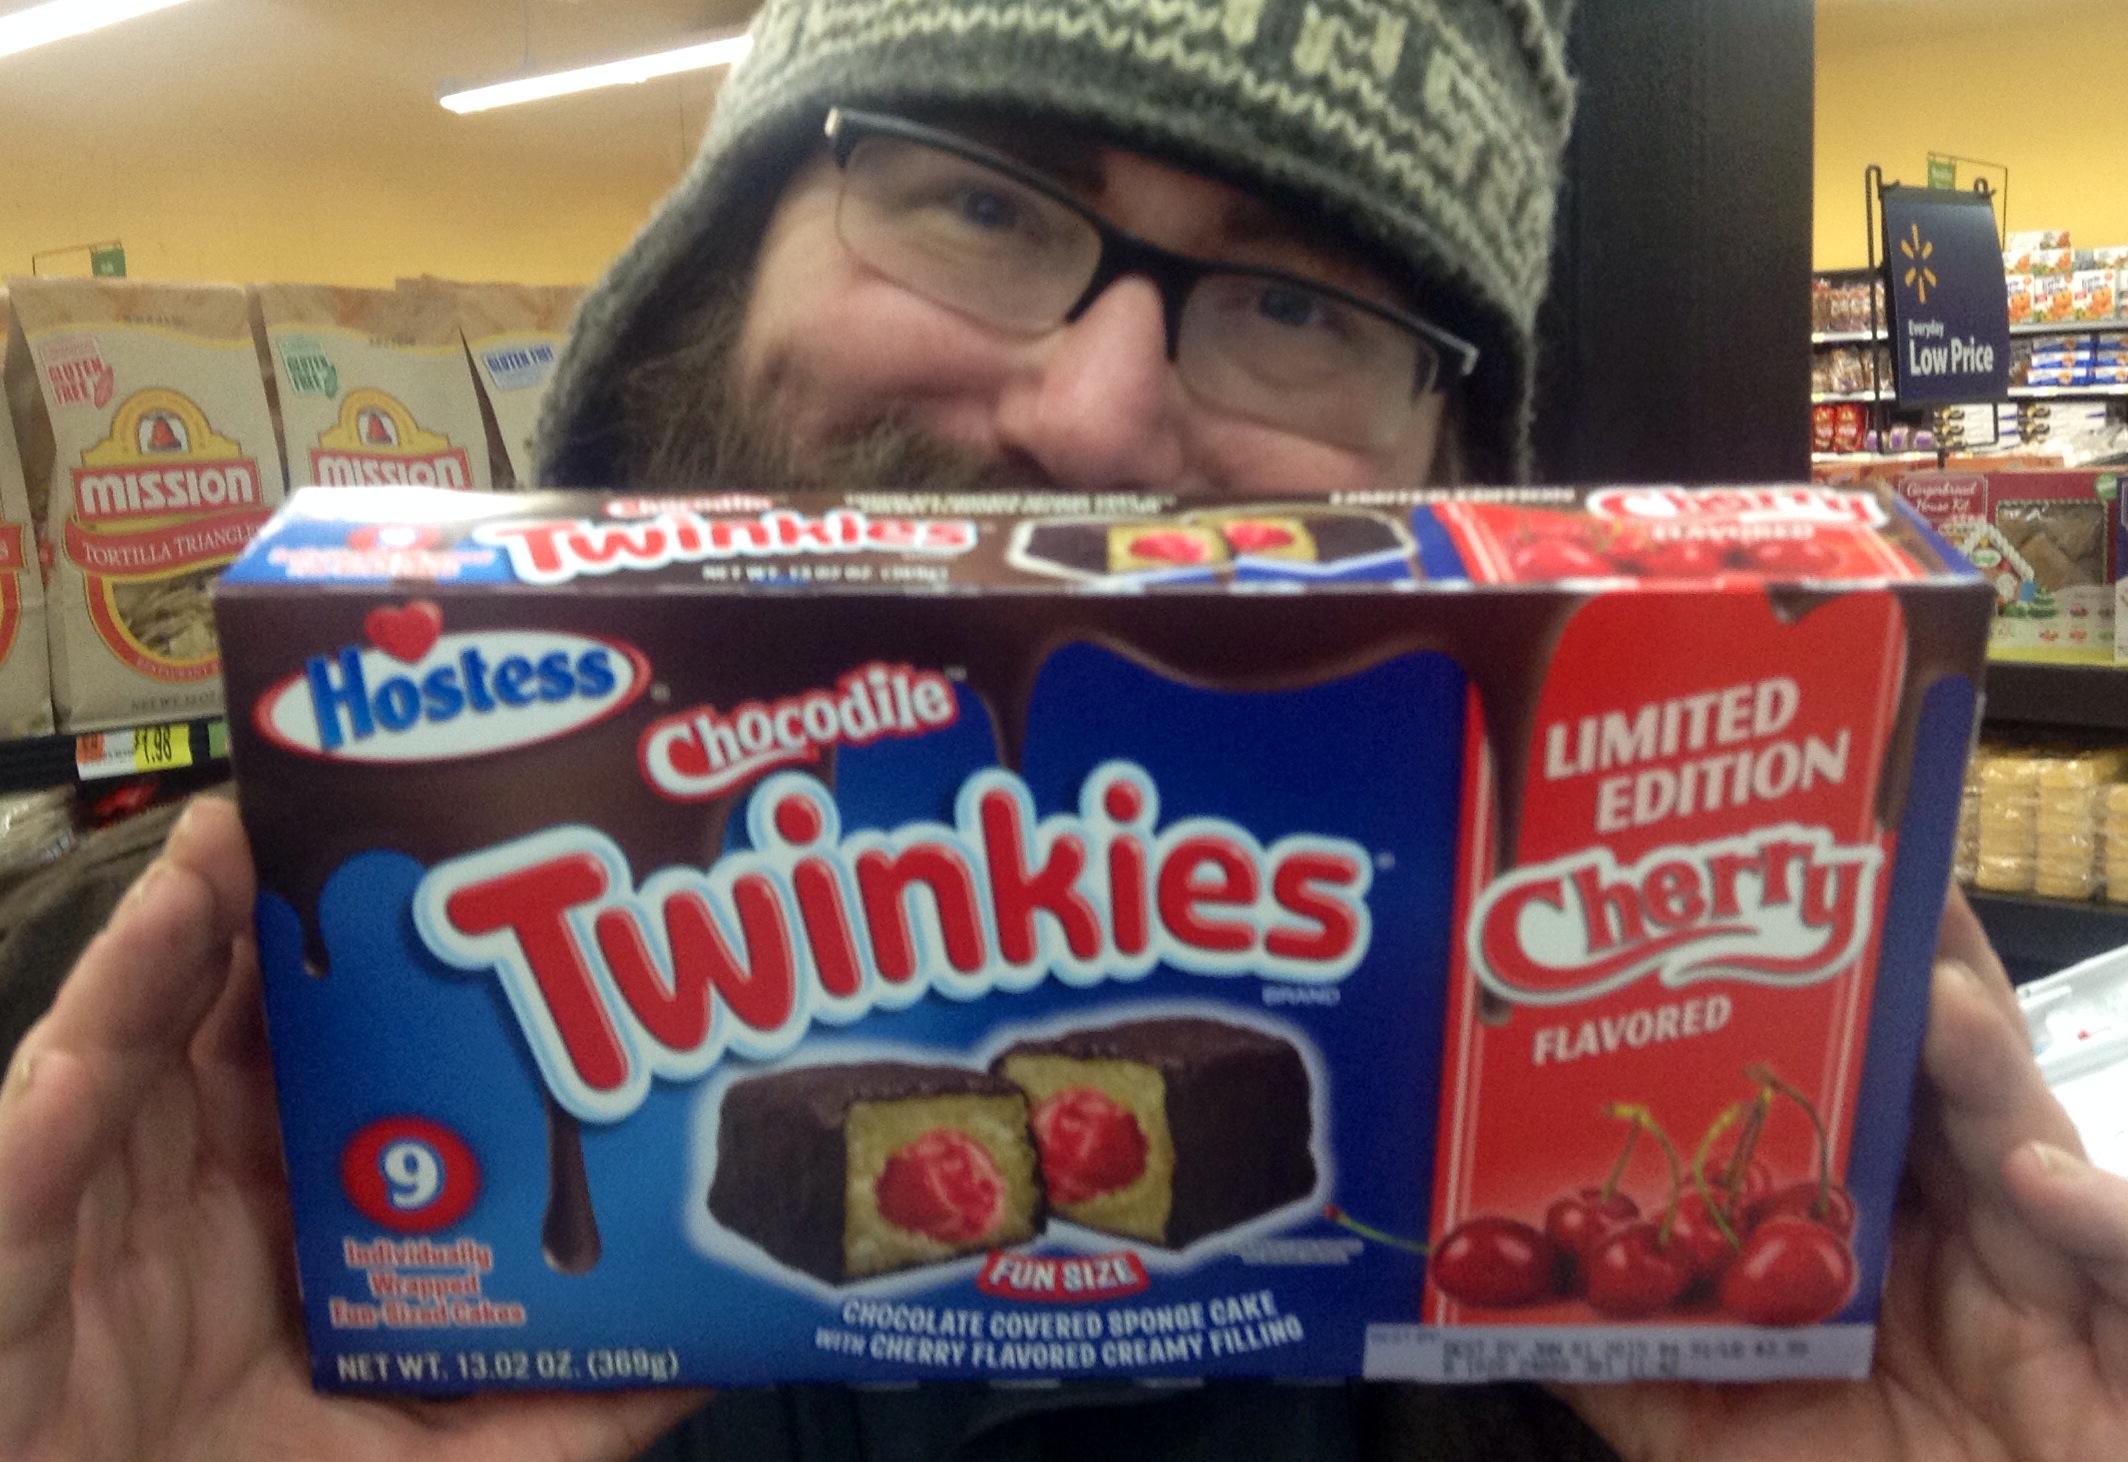 a man in a hat is holding up a box of twinkies